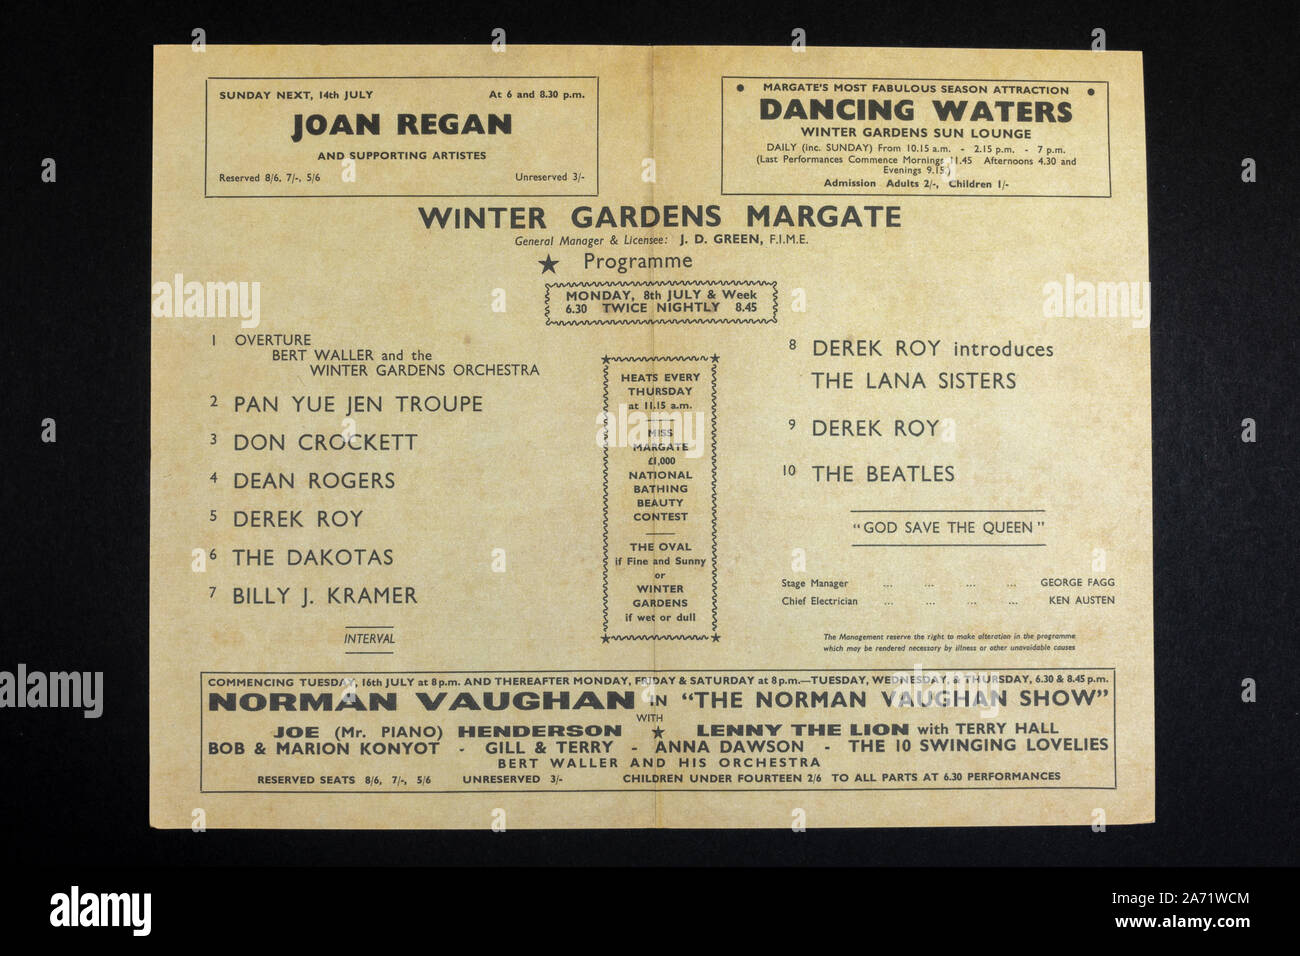 Replica memorabilia relating to the Beatles: Inside the programme for The Beatles appearance at Winter Gardens, Margate, 8-13th July 1963. Stock Photo